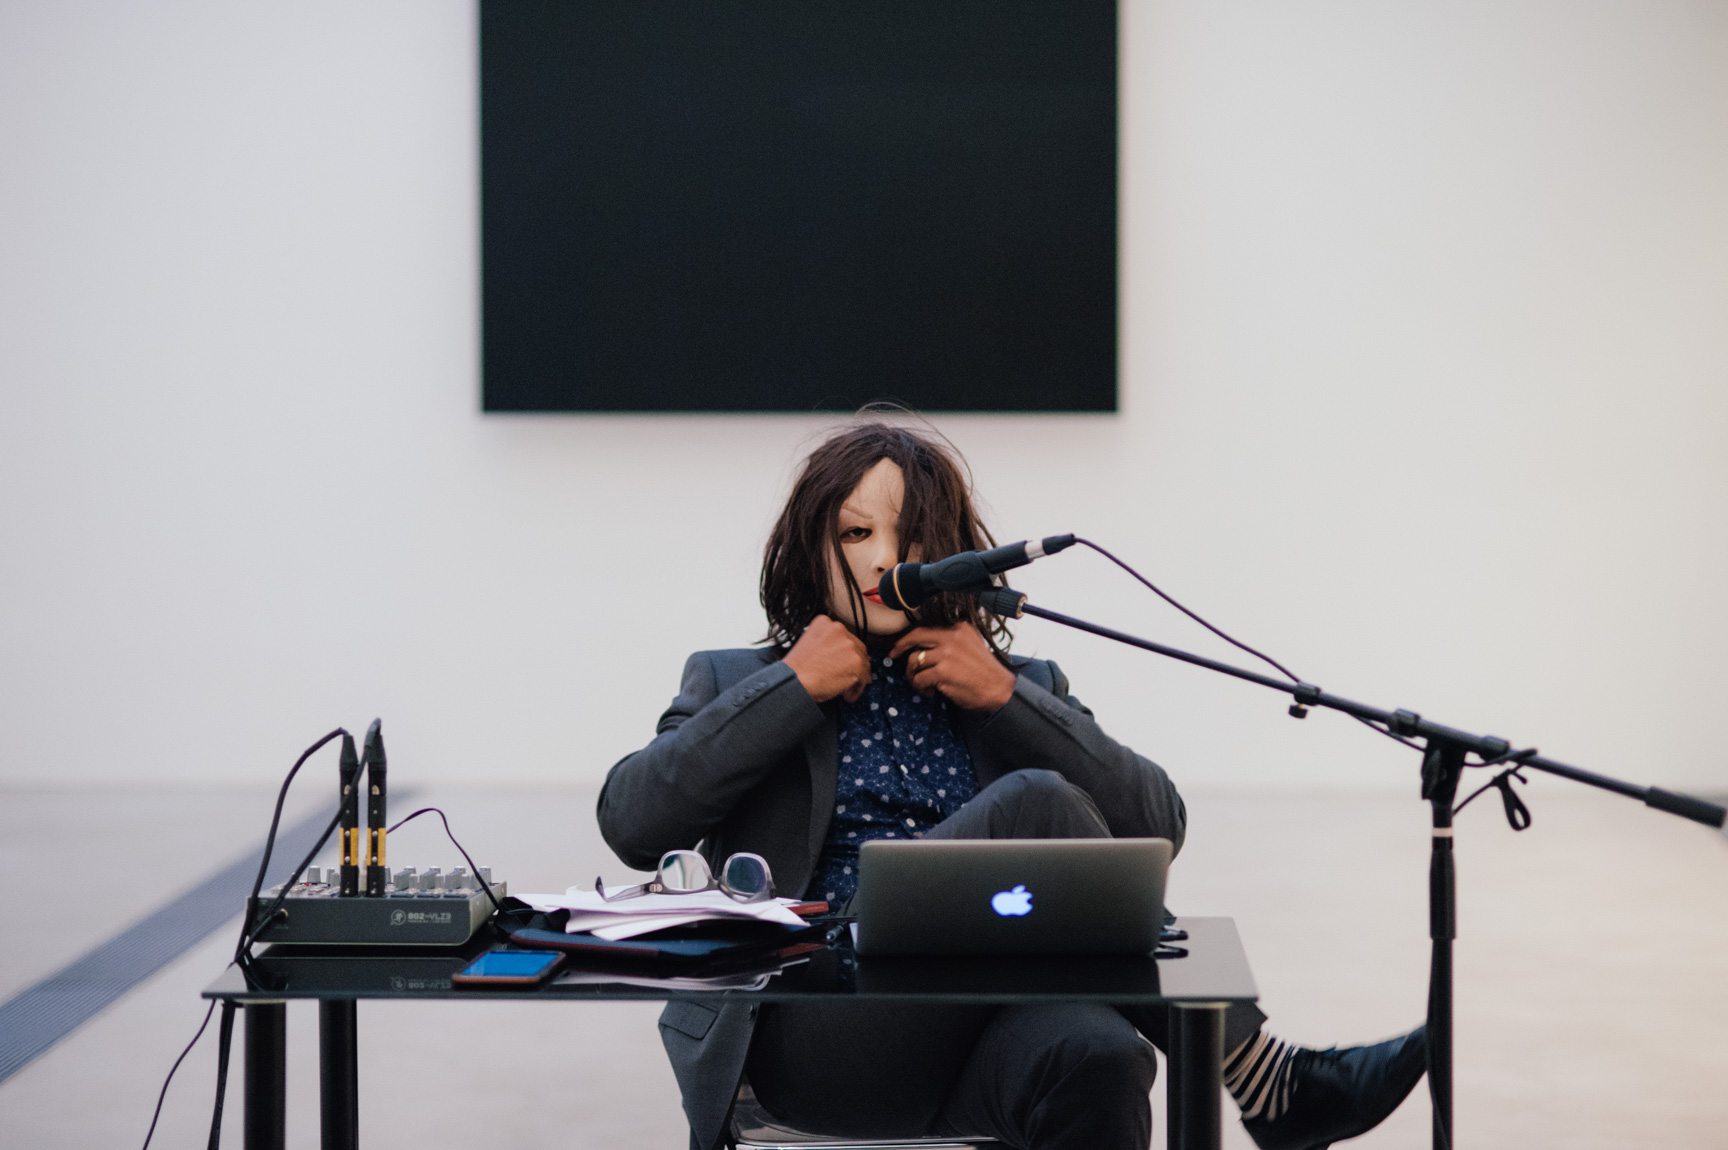 Ronaldo Wilson sits in a mask behind a desk with a microphone. Behind them is Ellsworth Kelly's "Blue Black."